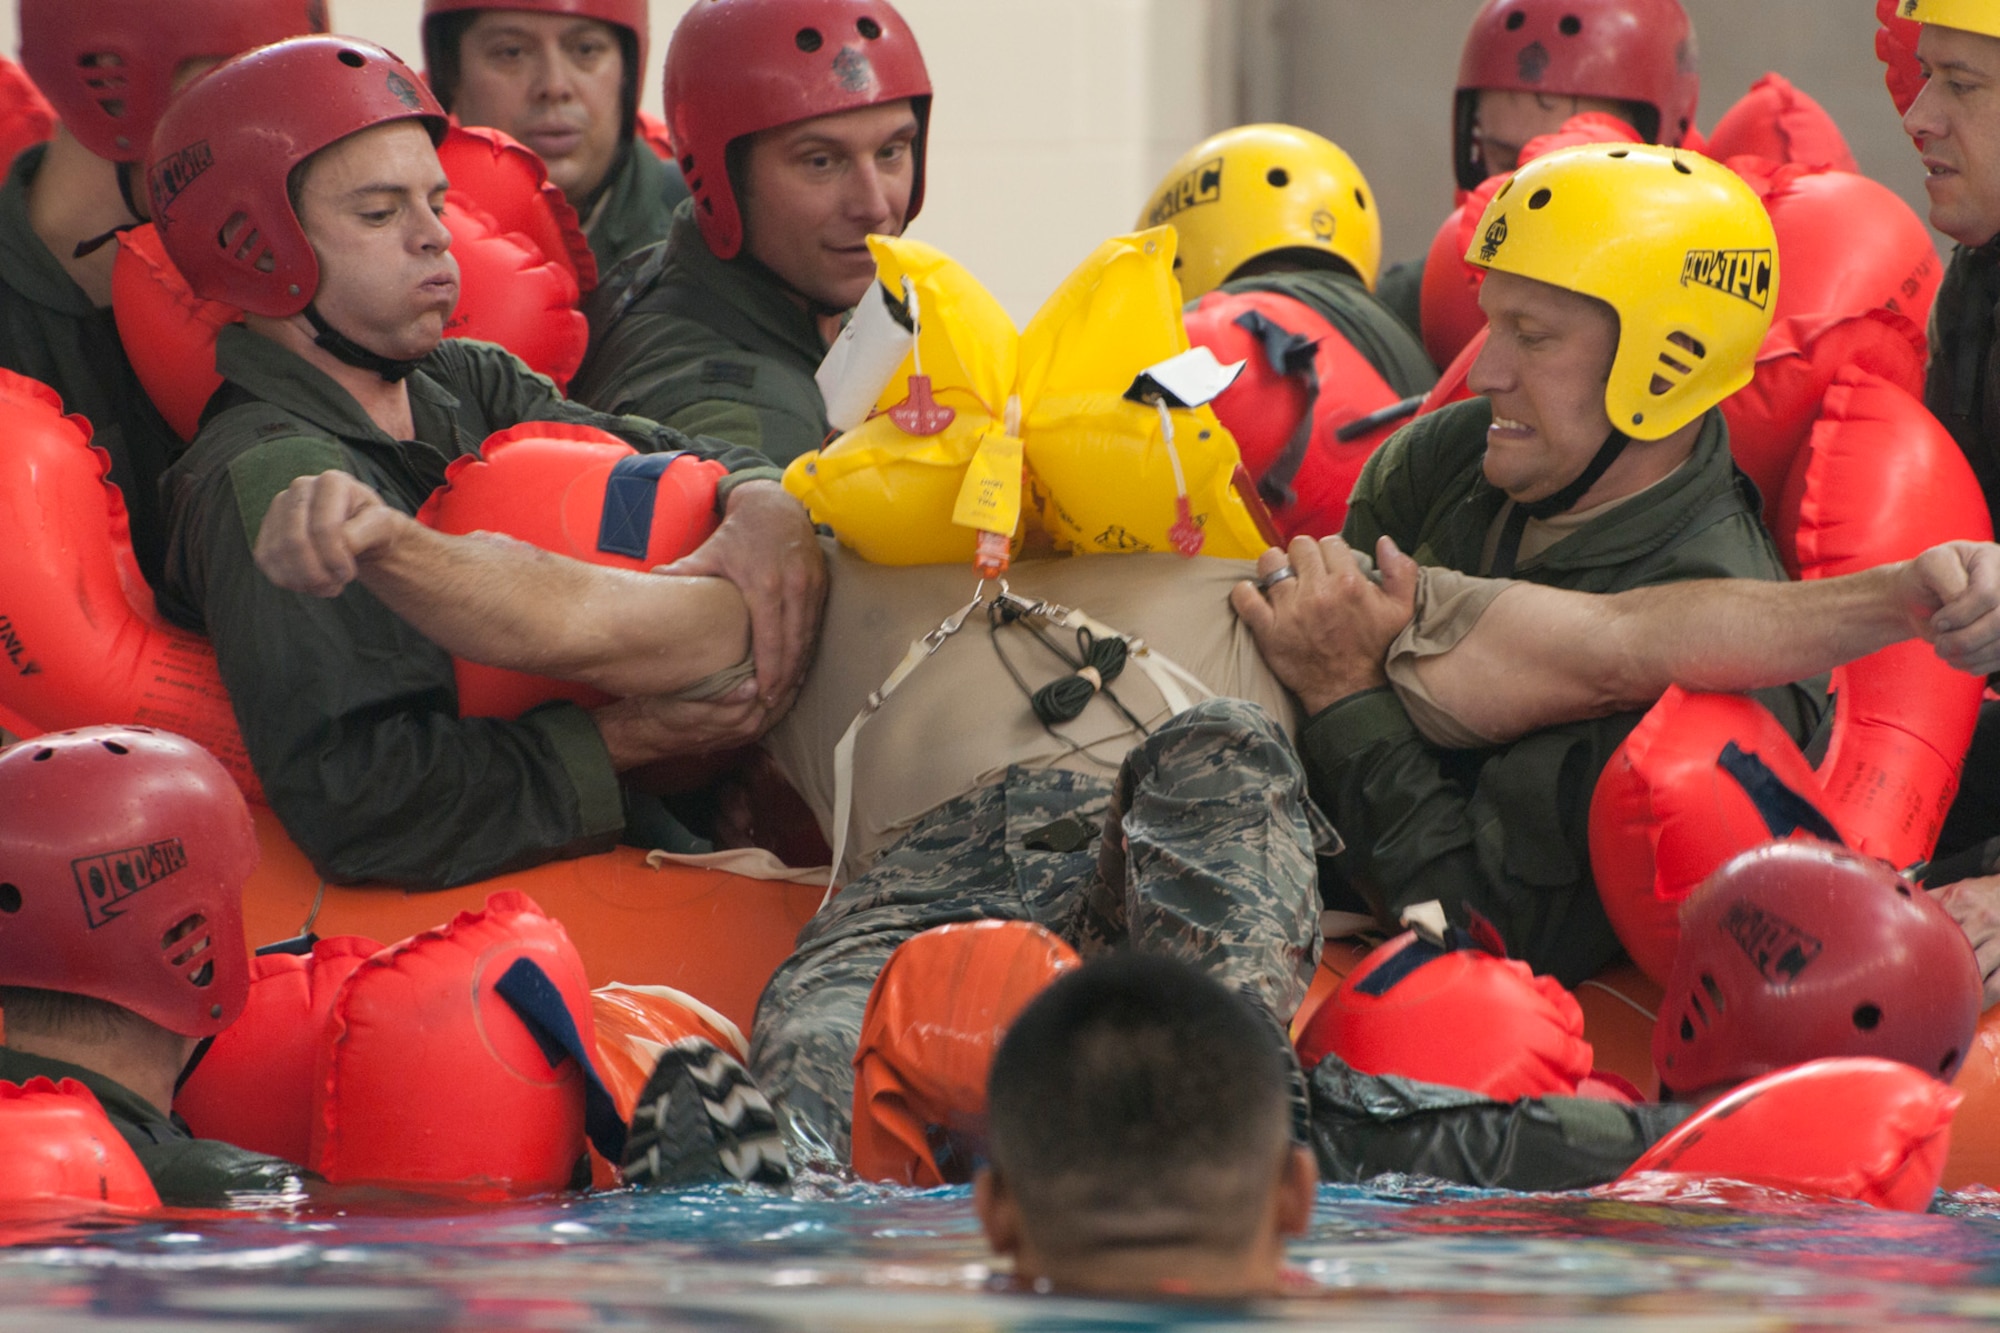 Airmen from the 171st Air Refueling Squadron, work together to pull an “injured” Airman out of the water during survival training in the pool of L’Anse Cruese North High School, near Selfridge Air National Guard Base, Mich., Oct. 16, 2012. Since Air Force air crews operate in a worldwide environment, they must train for every contingency scenario, including the possibility of a downed aircraft in an ocean or lake.  The 171st flies the KC-135 Stratotanker, which can carry approximately 50 passengers. (Air National Guard photo by TSgt. Robert Hanet)